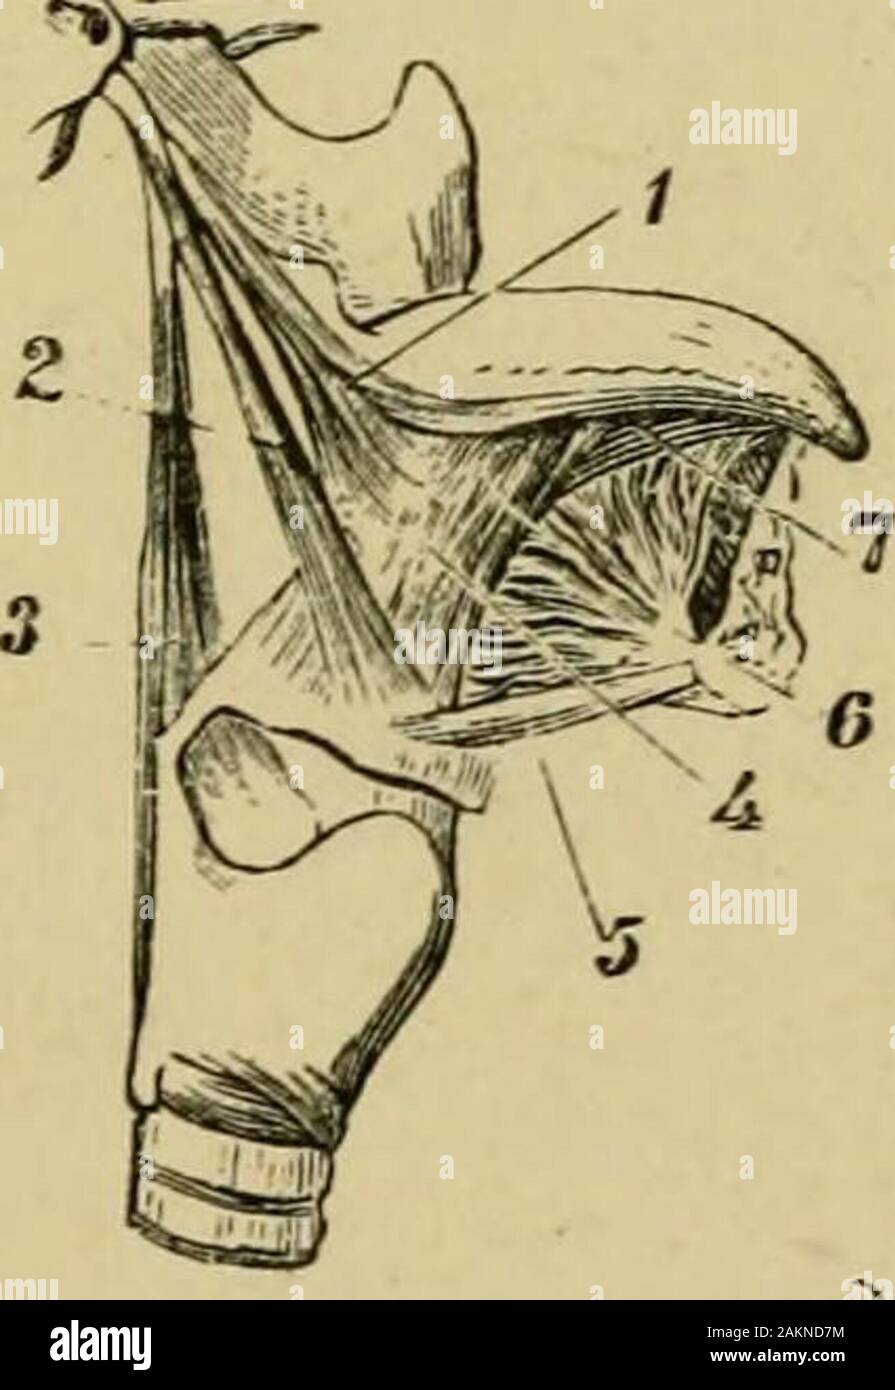 The common frog . Fig. 64.—Diagram of Caudal Muscles of Right Side or Tail of Iguana, showinghow the ventral mass resembles the dorsal part, and how the tendinous inter-sections of the mu cular fibres are drawn out into cones. N, neural spine;11, hypapophysial spine ; z, zygapophysis ; /, transverse process ; i, dorsal seriesof cones ; 2, upper lateral series of cones ; 3, lower series of cones ; veuLral seriesof cones. separating membranes and subsequent sphtting up ofthe muscular mass into super-imposed sheets ofdifferently-directed fibres. This filiation between piscine and mammalianmyology Stock Photo